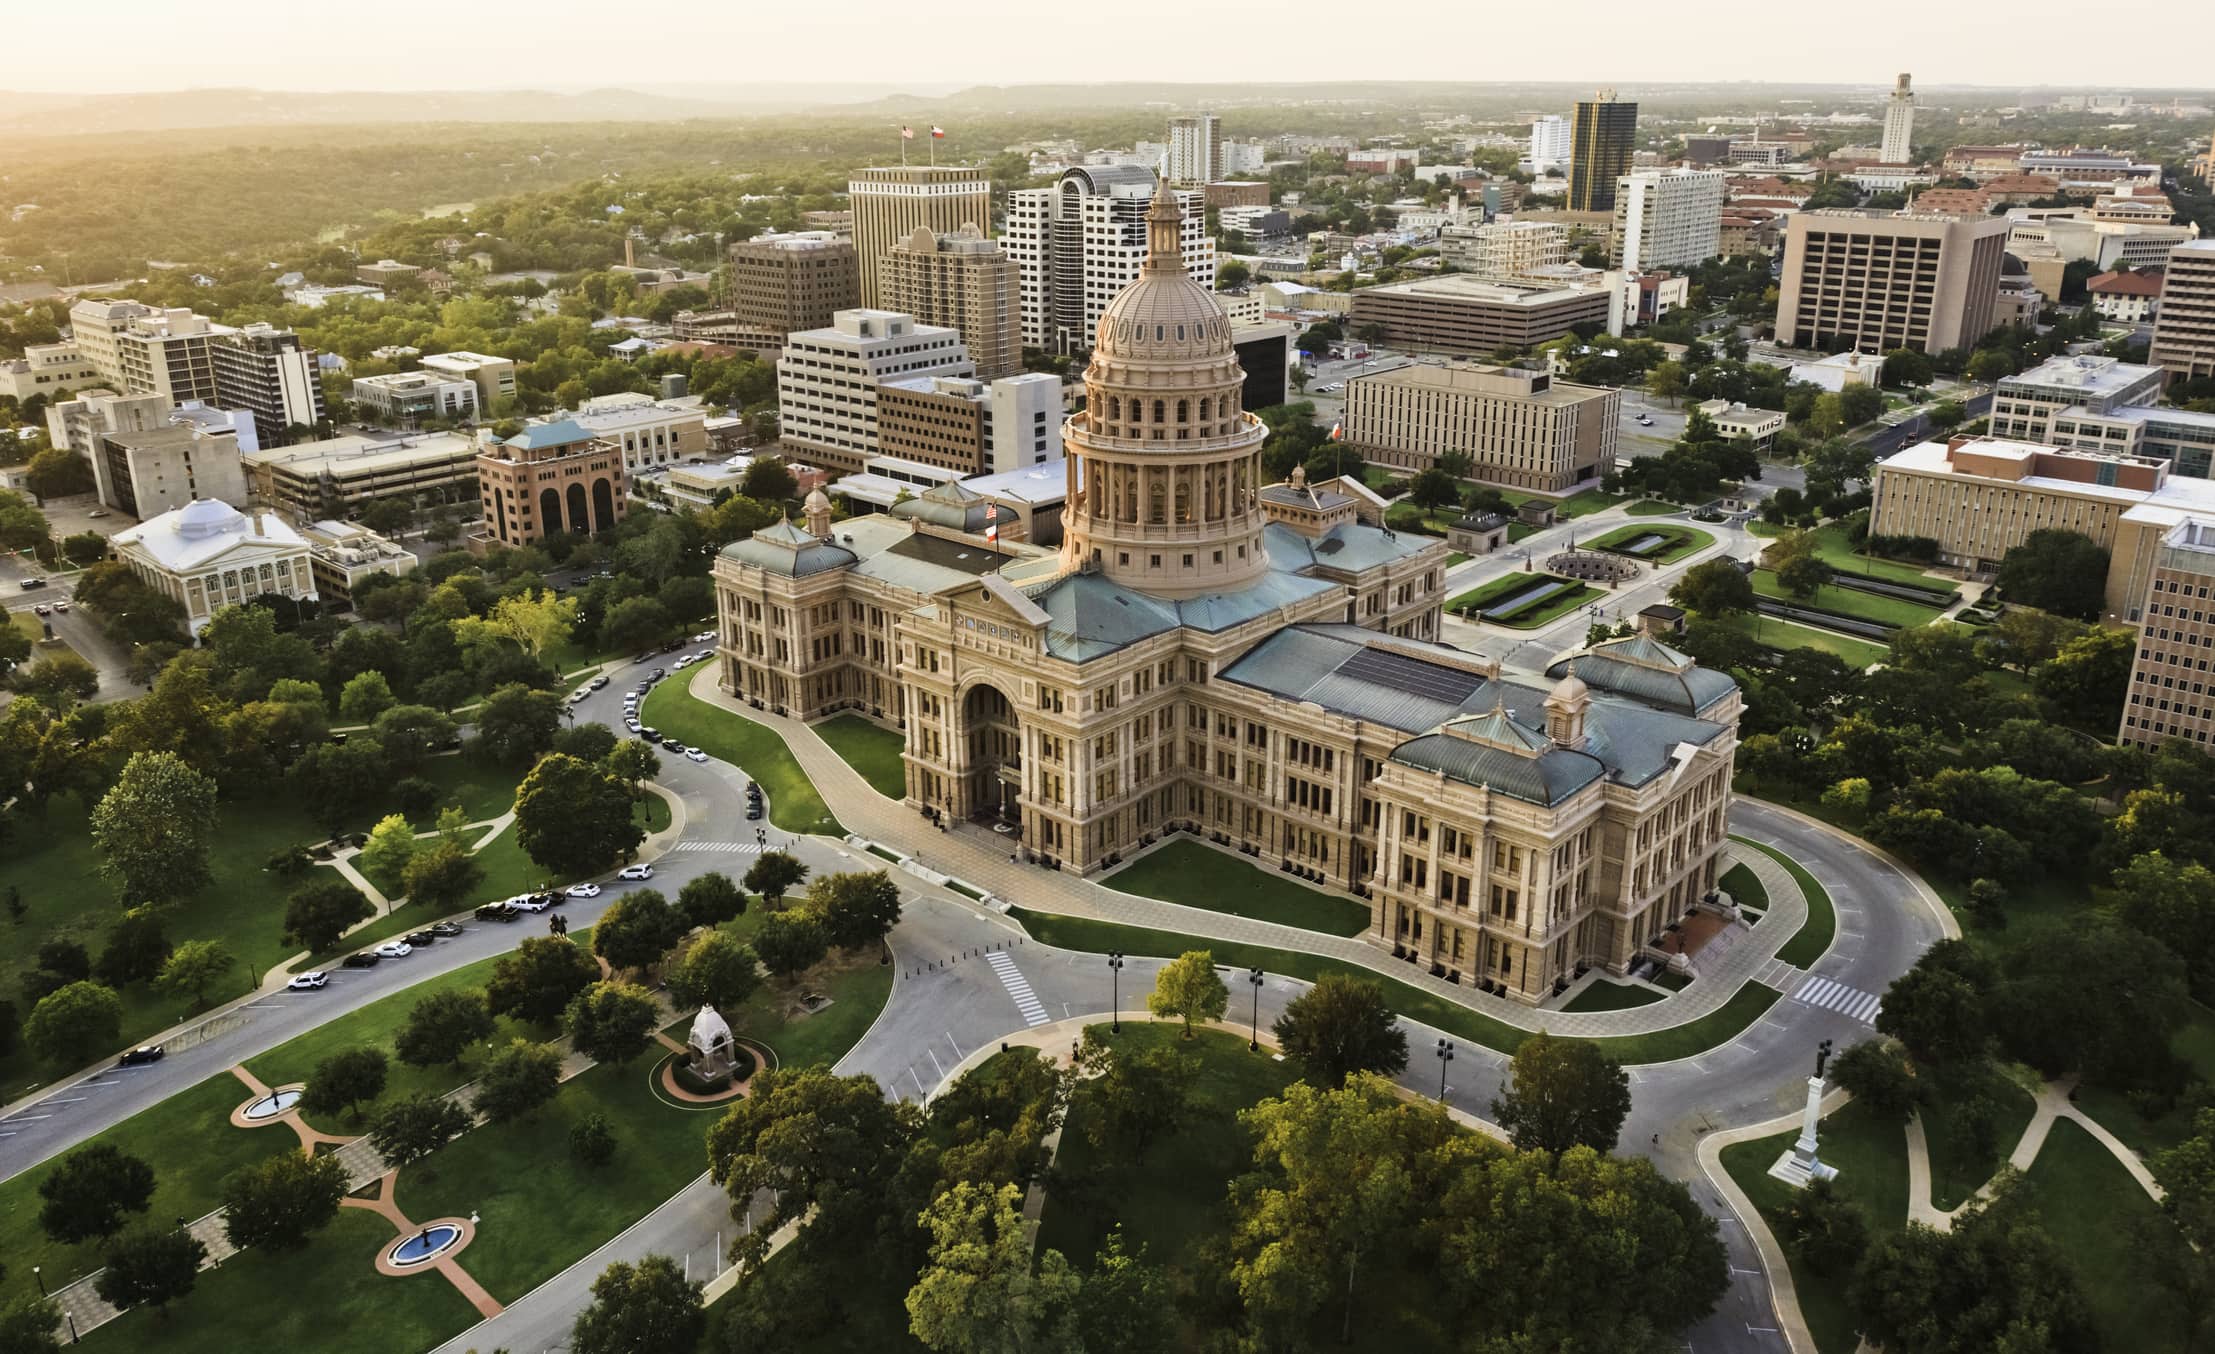 Aerial view of Capitol building in Austin the Capital of Texas